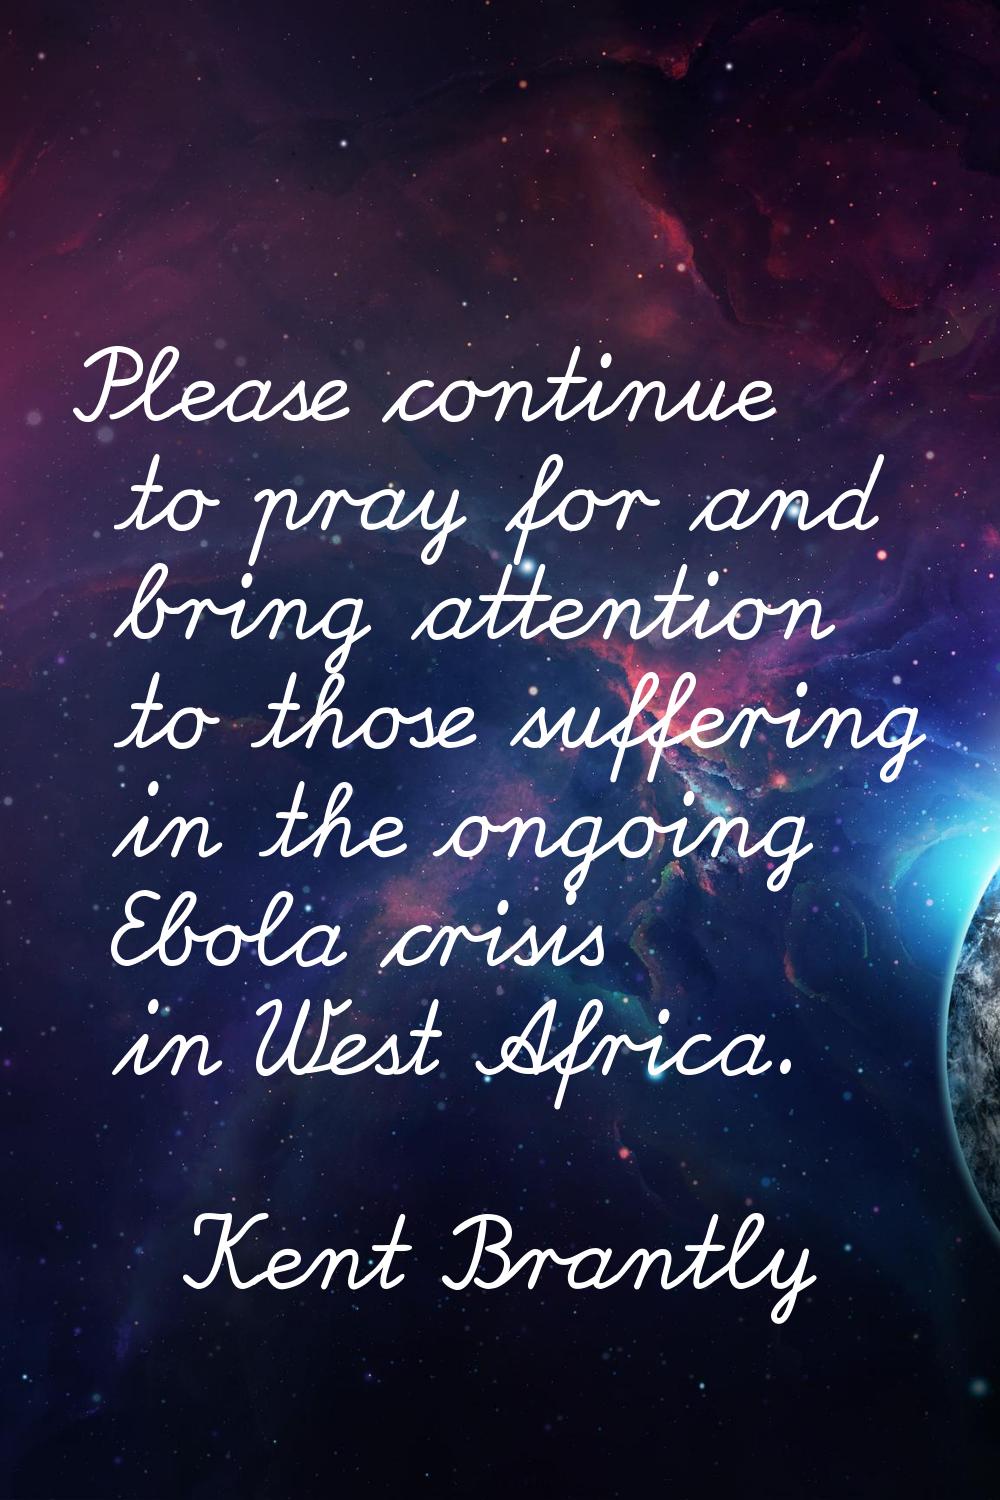 Please continue to pray for and bring attention to those suffering in the ongoing Ebola crisis in W